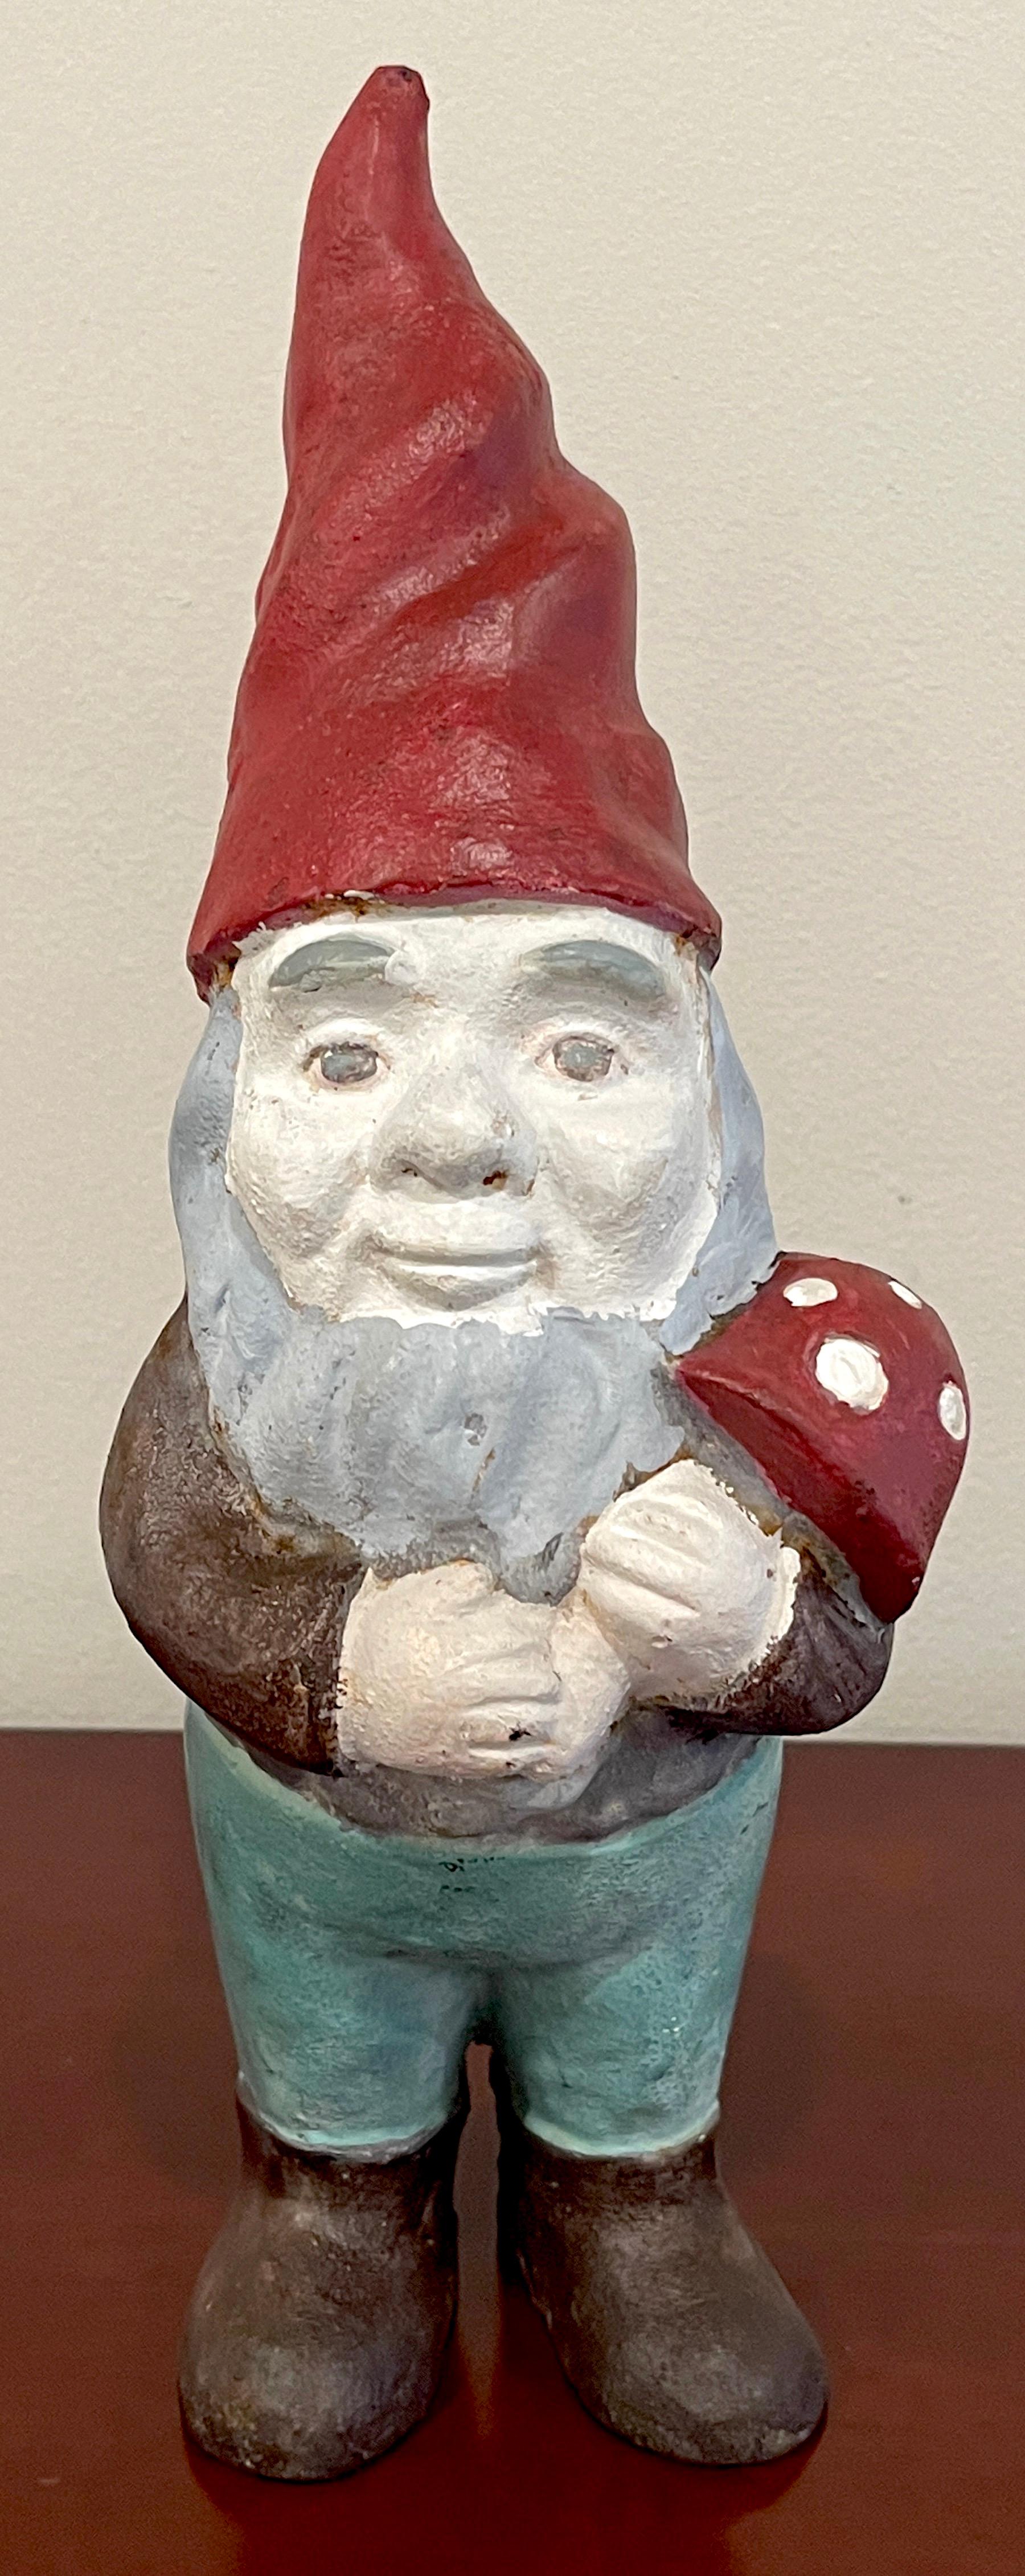 Antique cast iron gnome holding mushroom doorstop/lawn ornament,
Original Paint, USA, Circa 1930s
A great example of American Folk Art, a well painted and taken care of Doorstop/Lawn Ornament This whimsical symbols of good luck, standing tall with